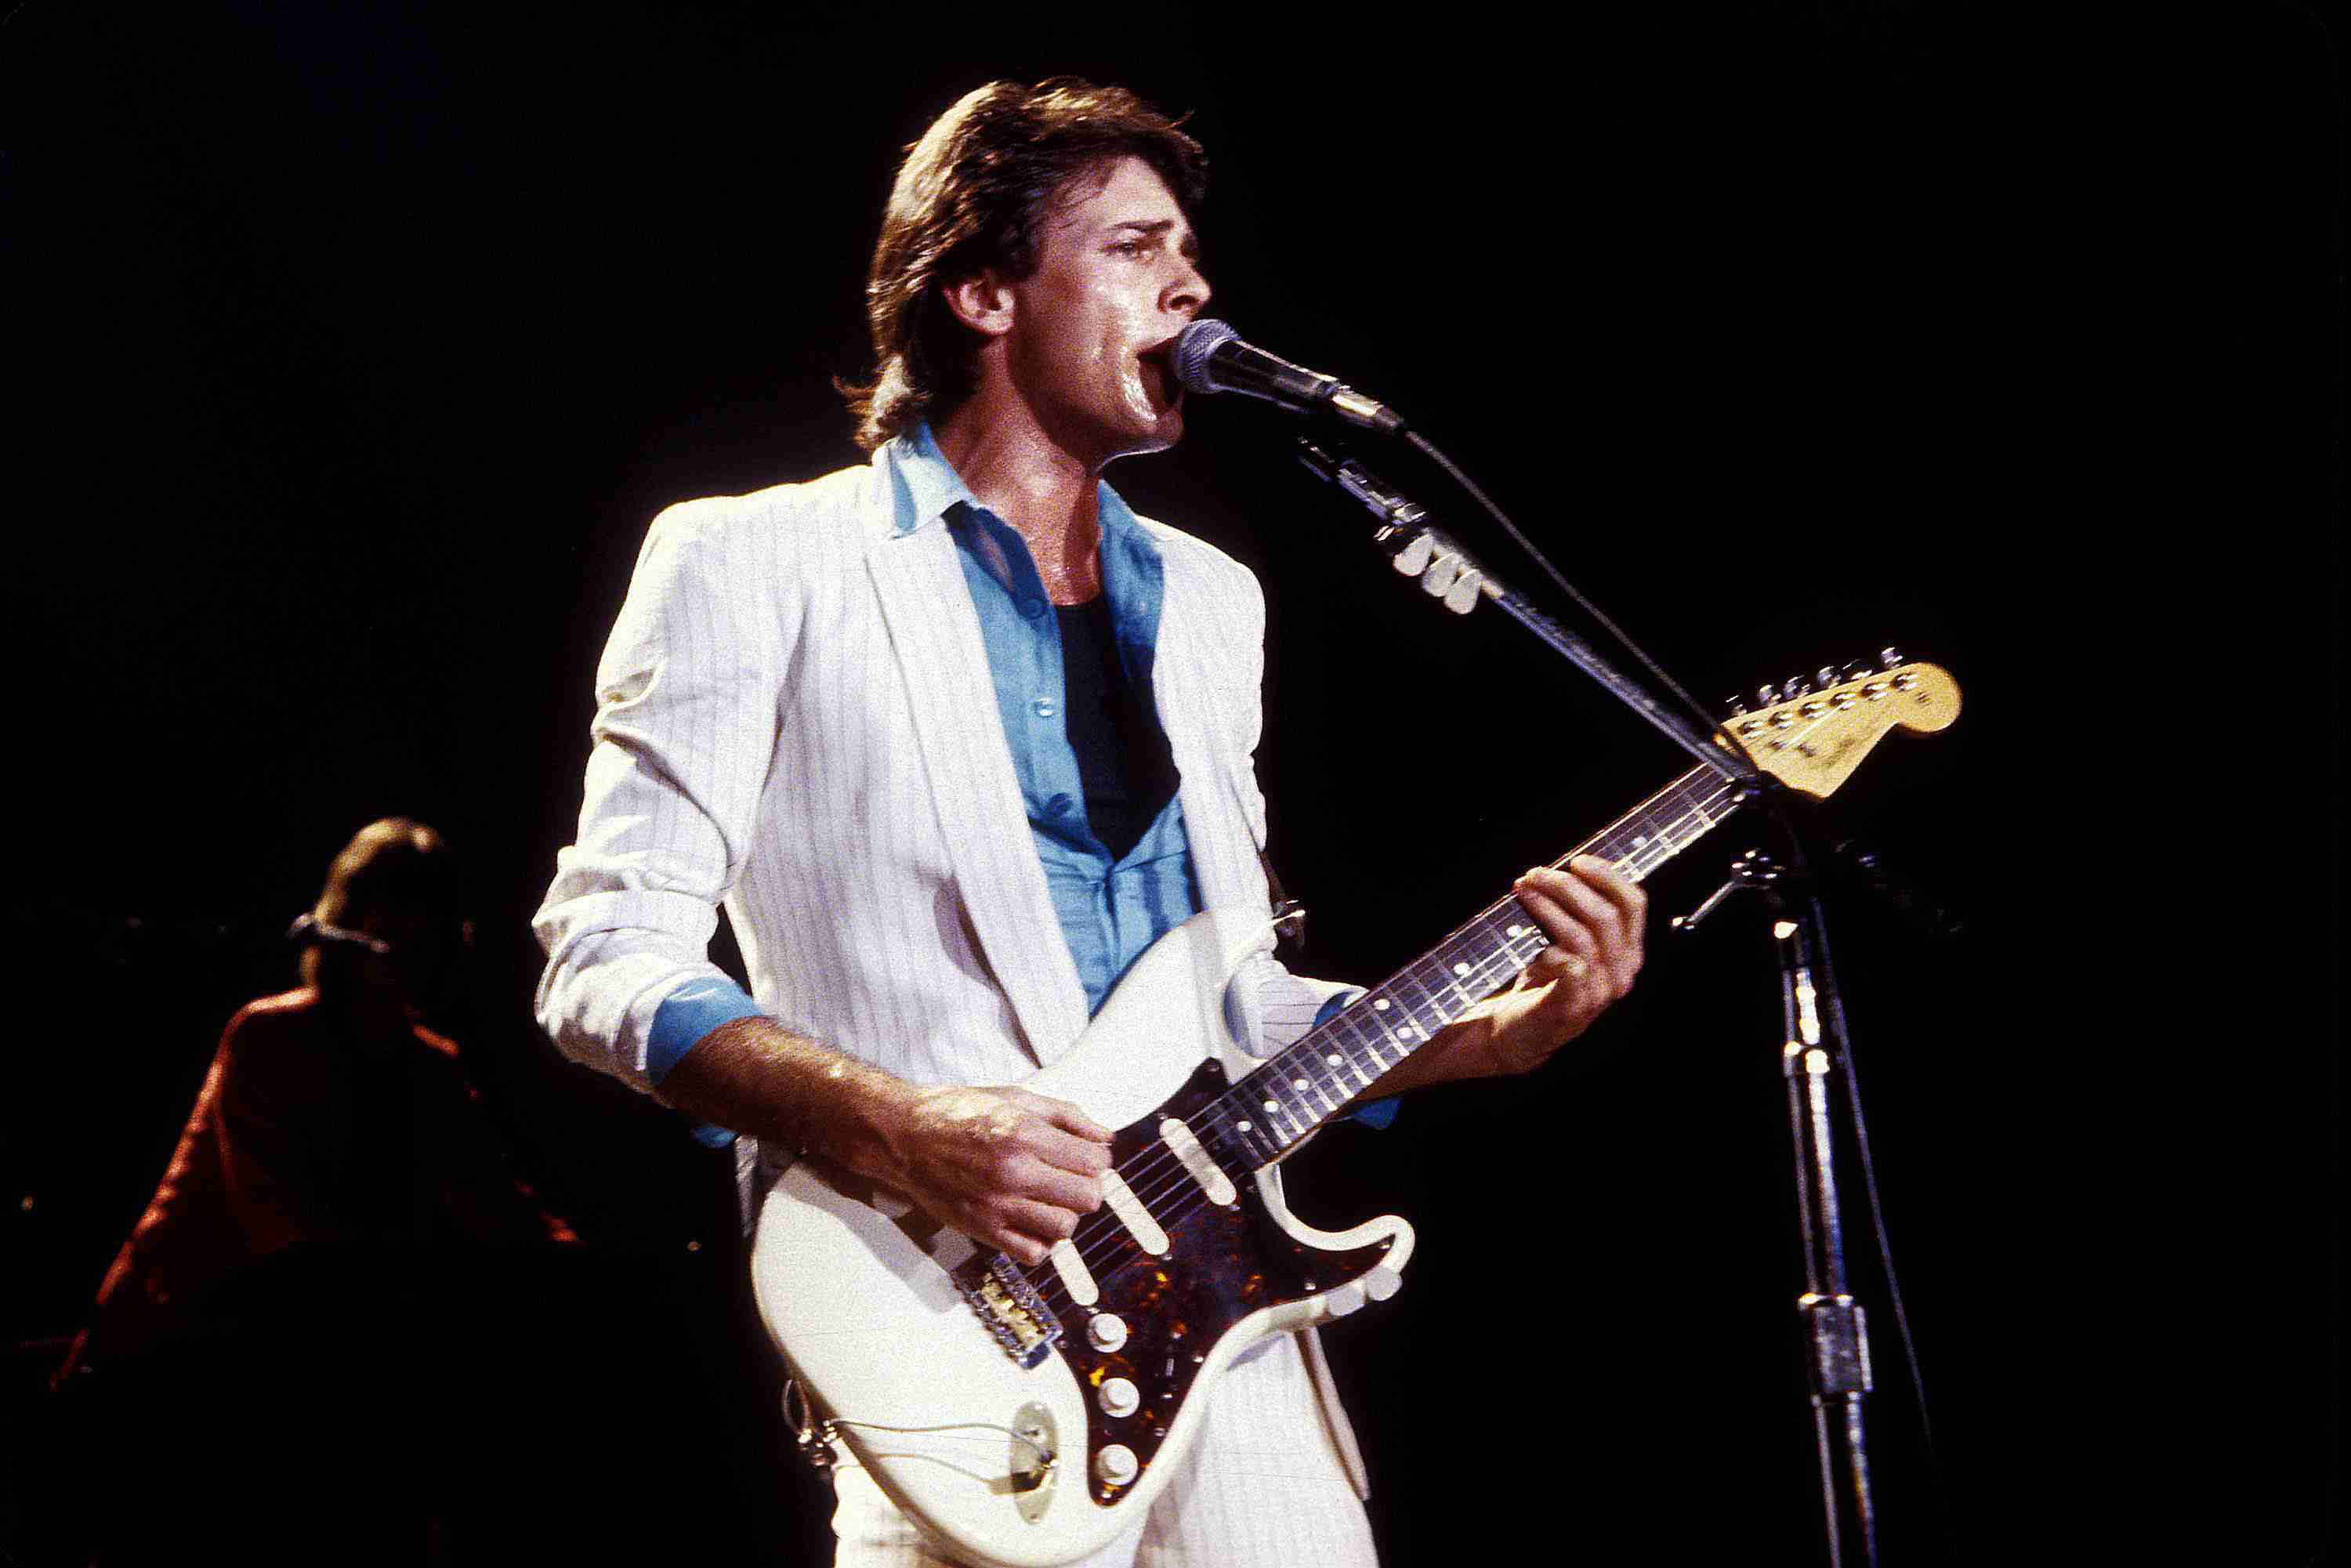 Rick Springfield's Top Songs From the '80s